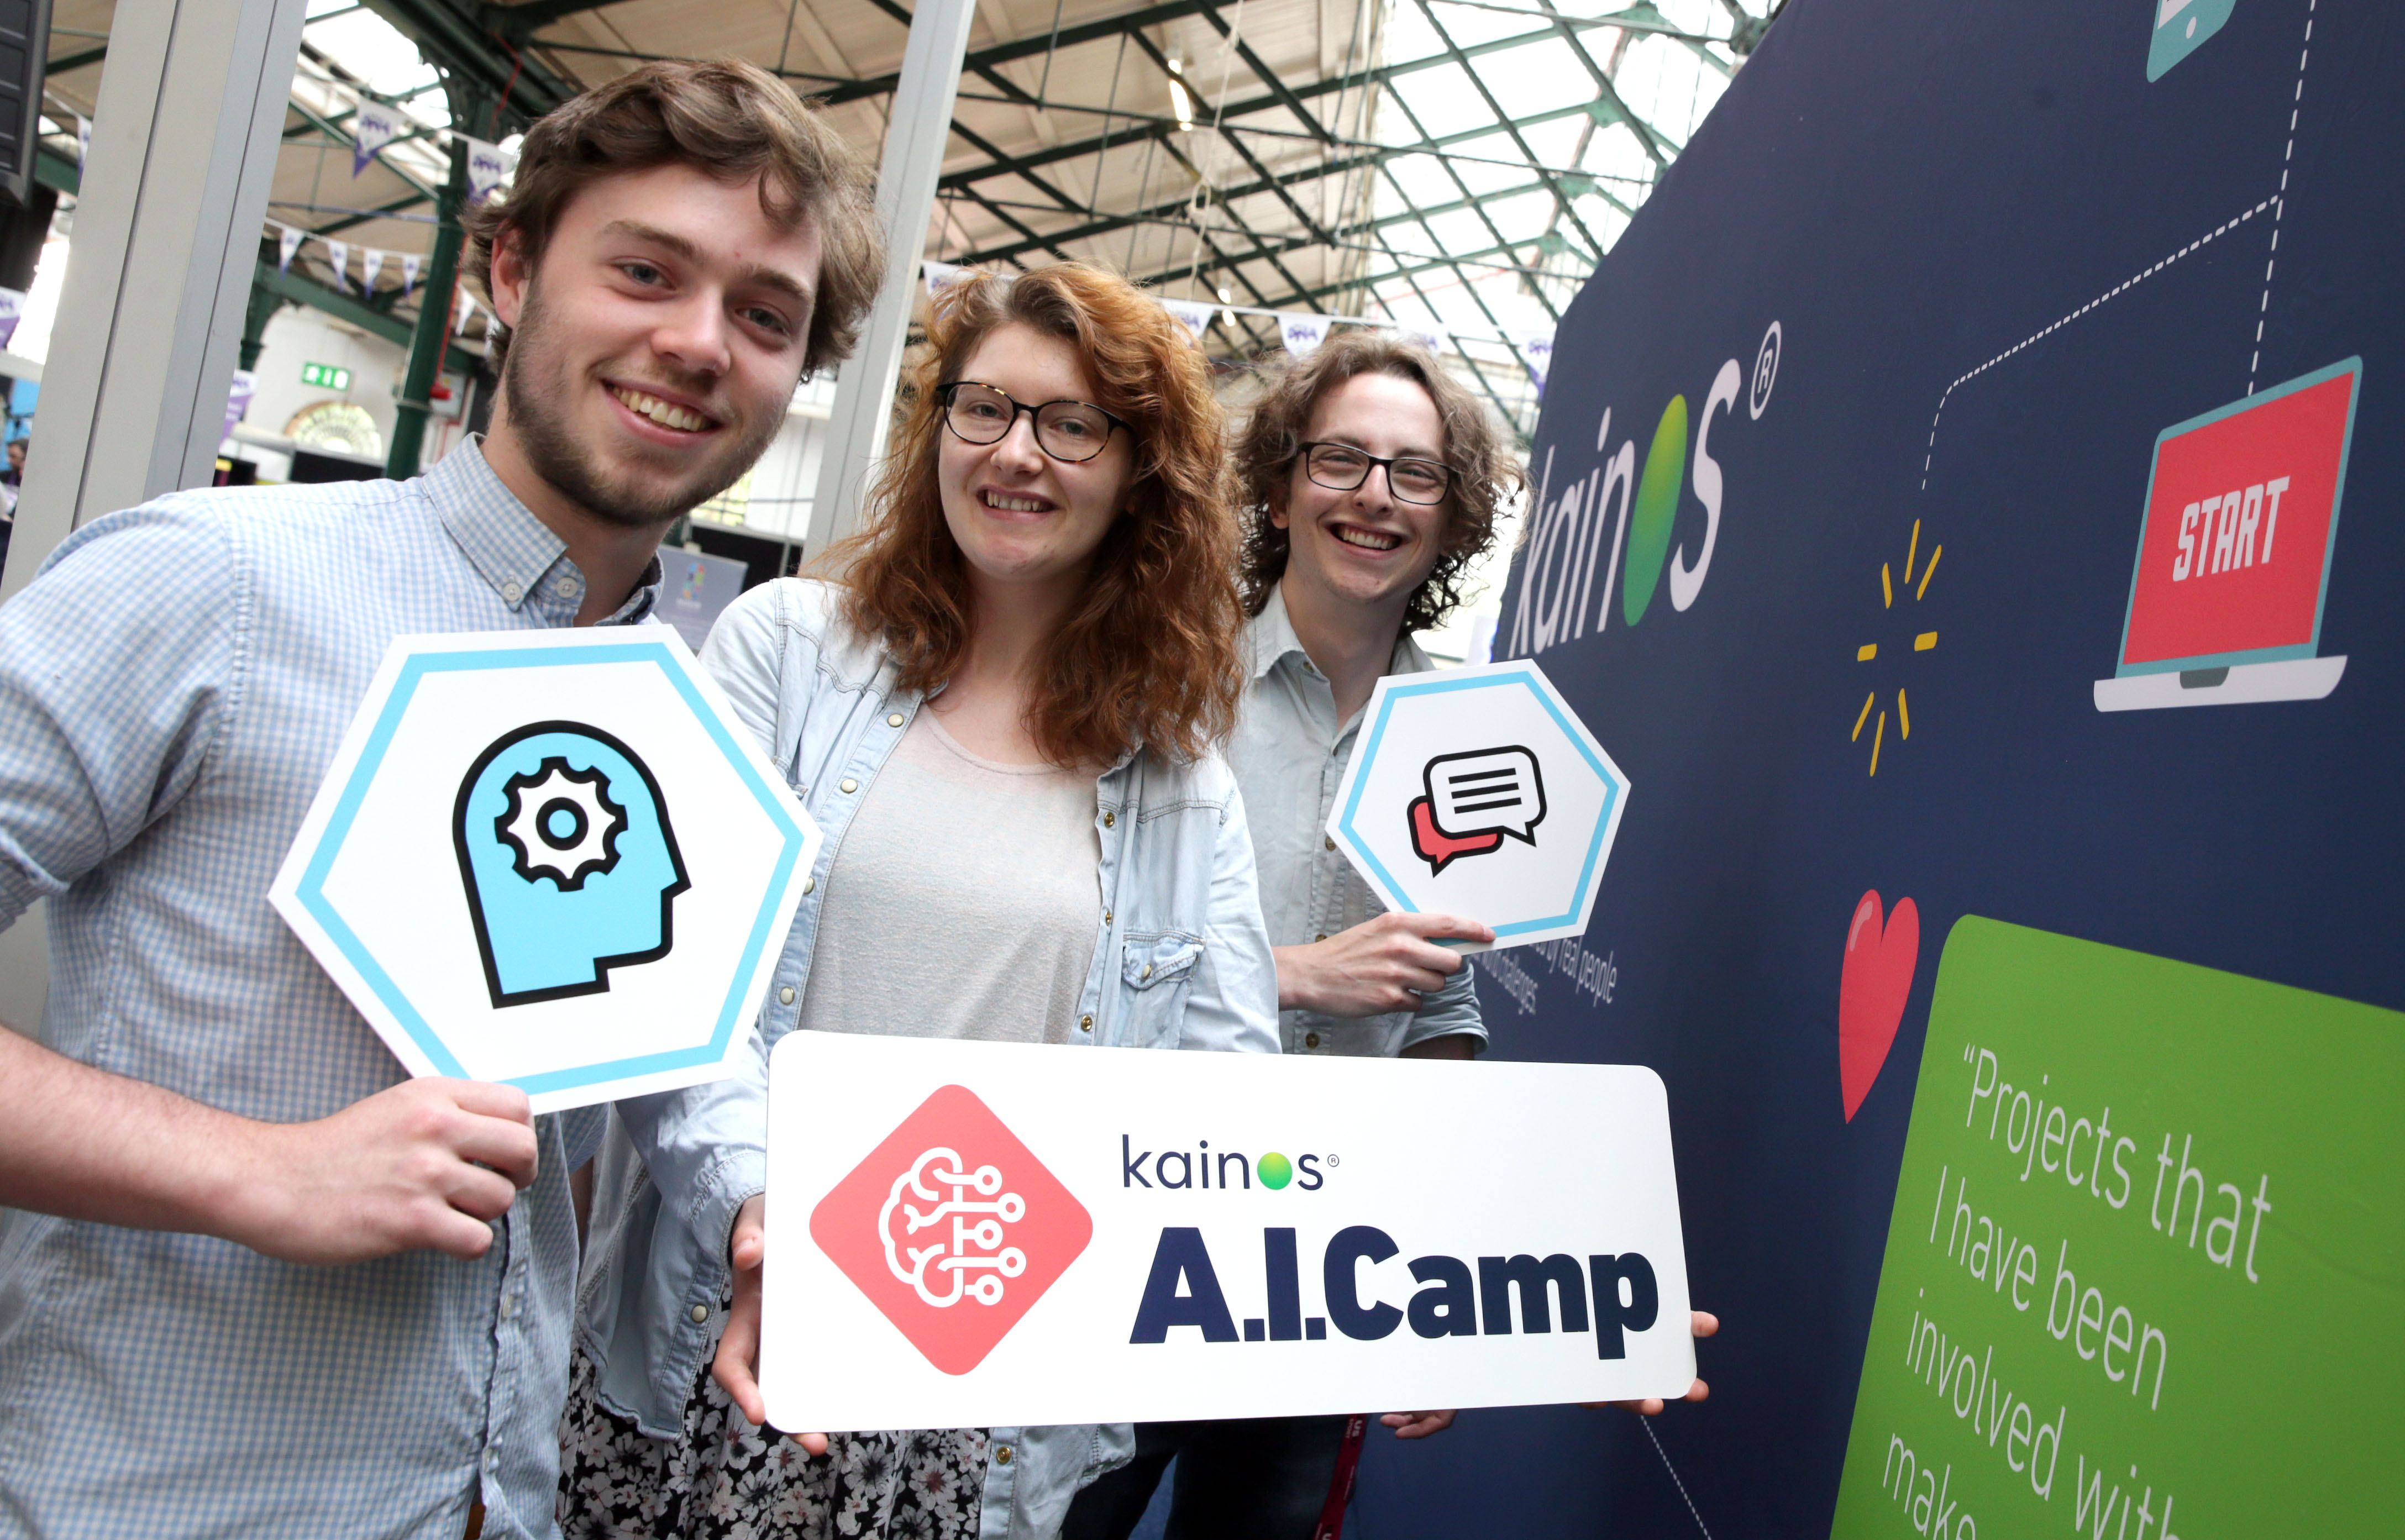 Kainos searches for undergrads to lead new era in A.I. development